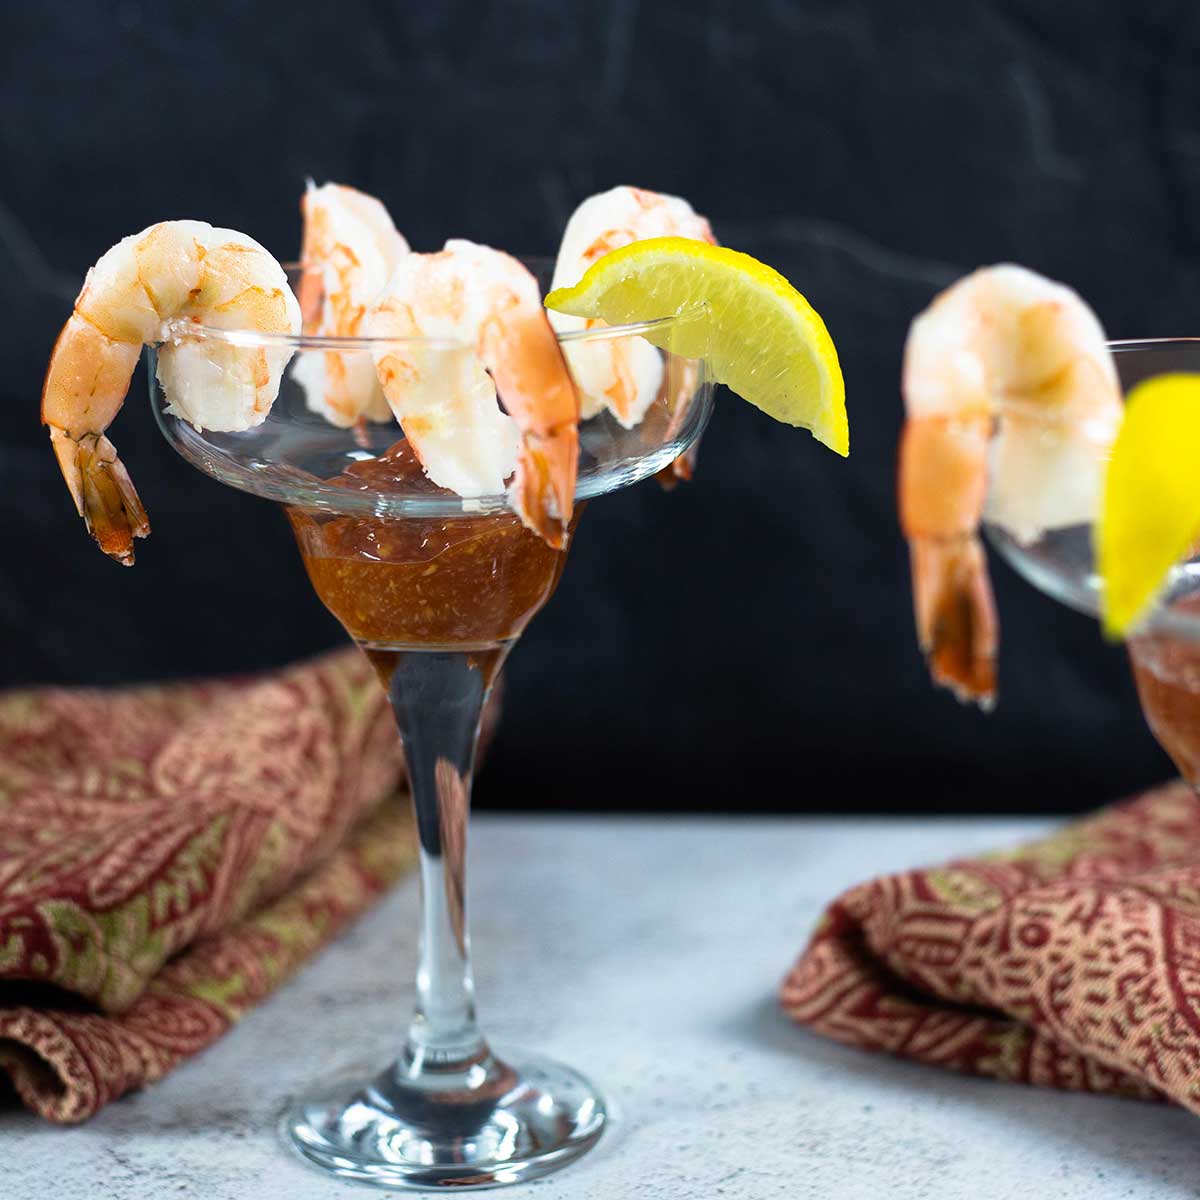 Shrimp cocktail in a margarita glass with a 4 shrimp and a lemon wedge